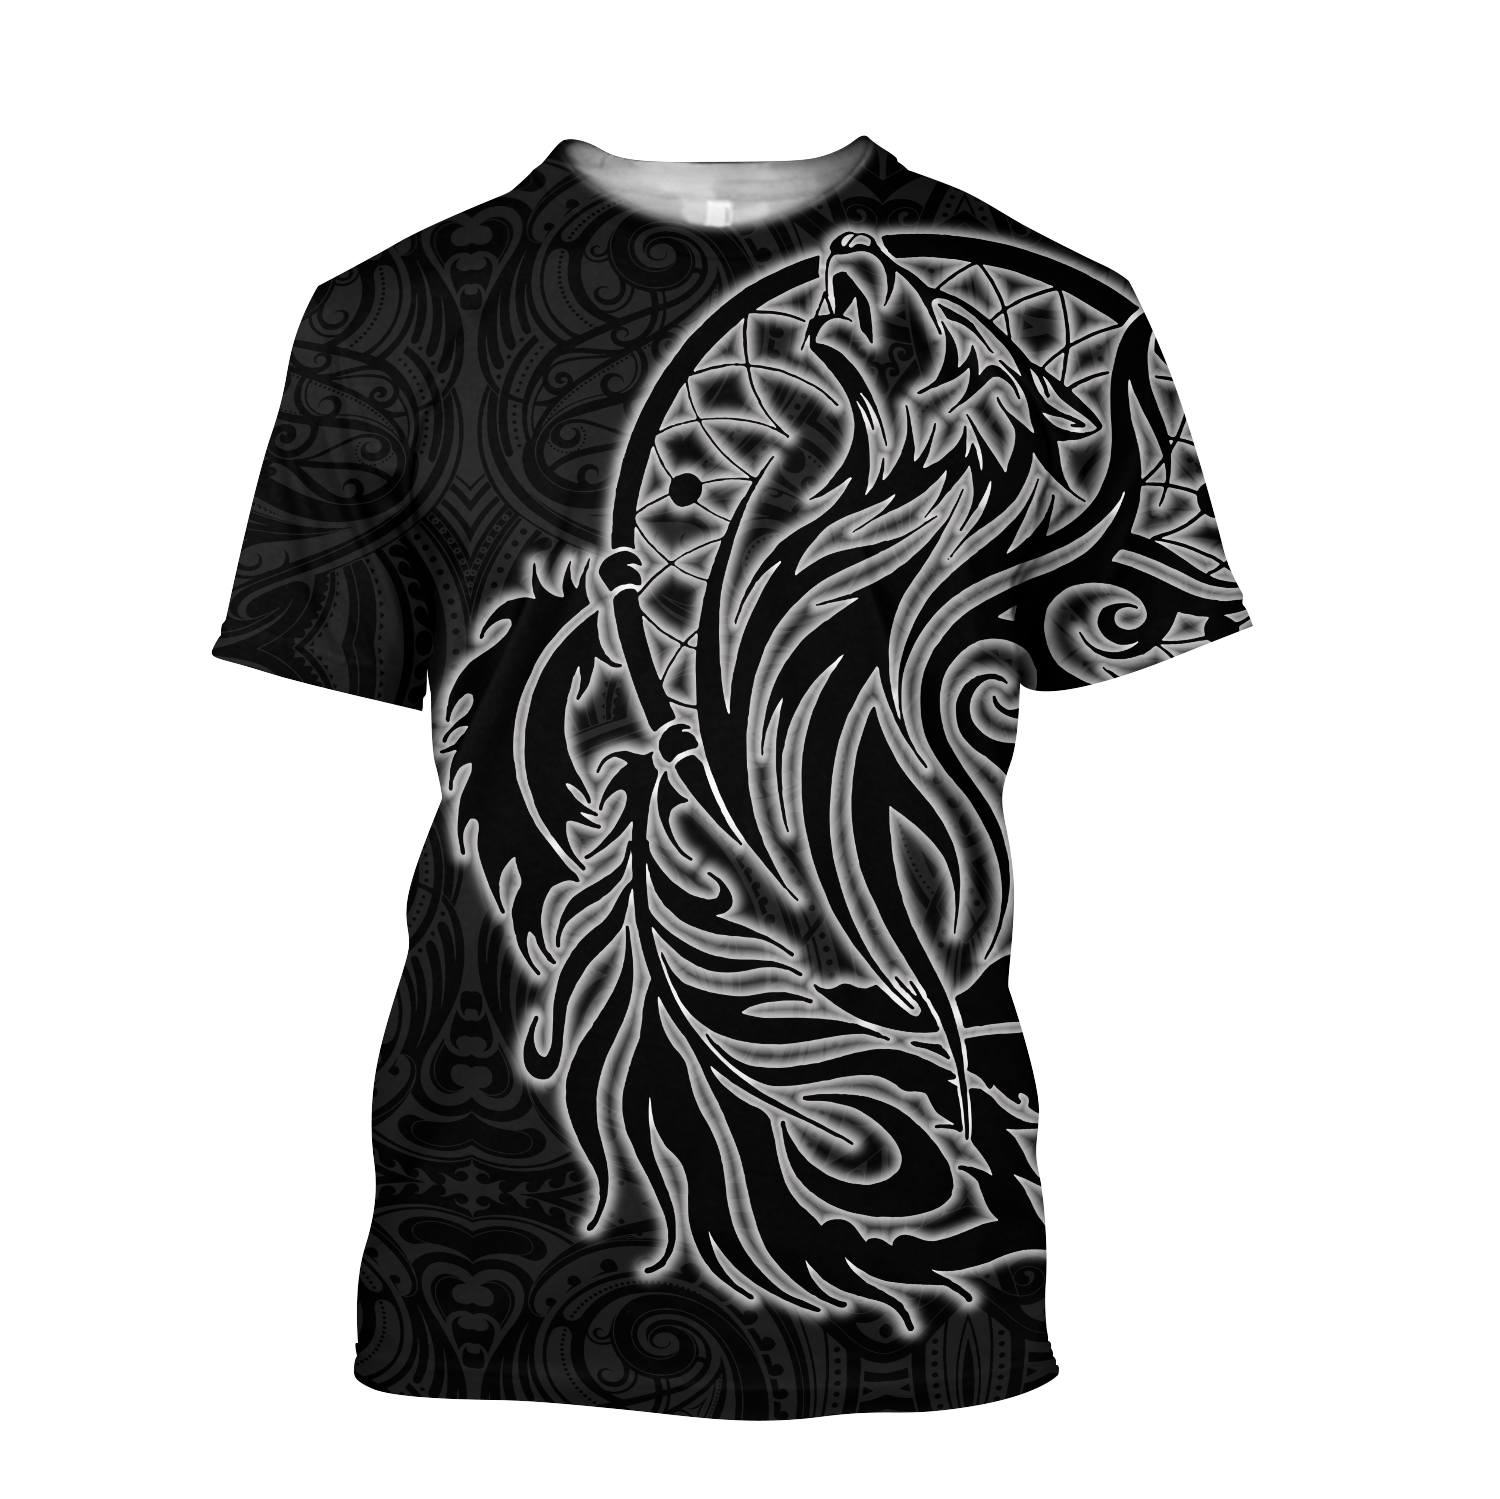 Maori dream catcher wolf tattoo 3d all over printed shirt and short for ...